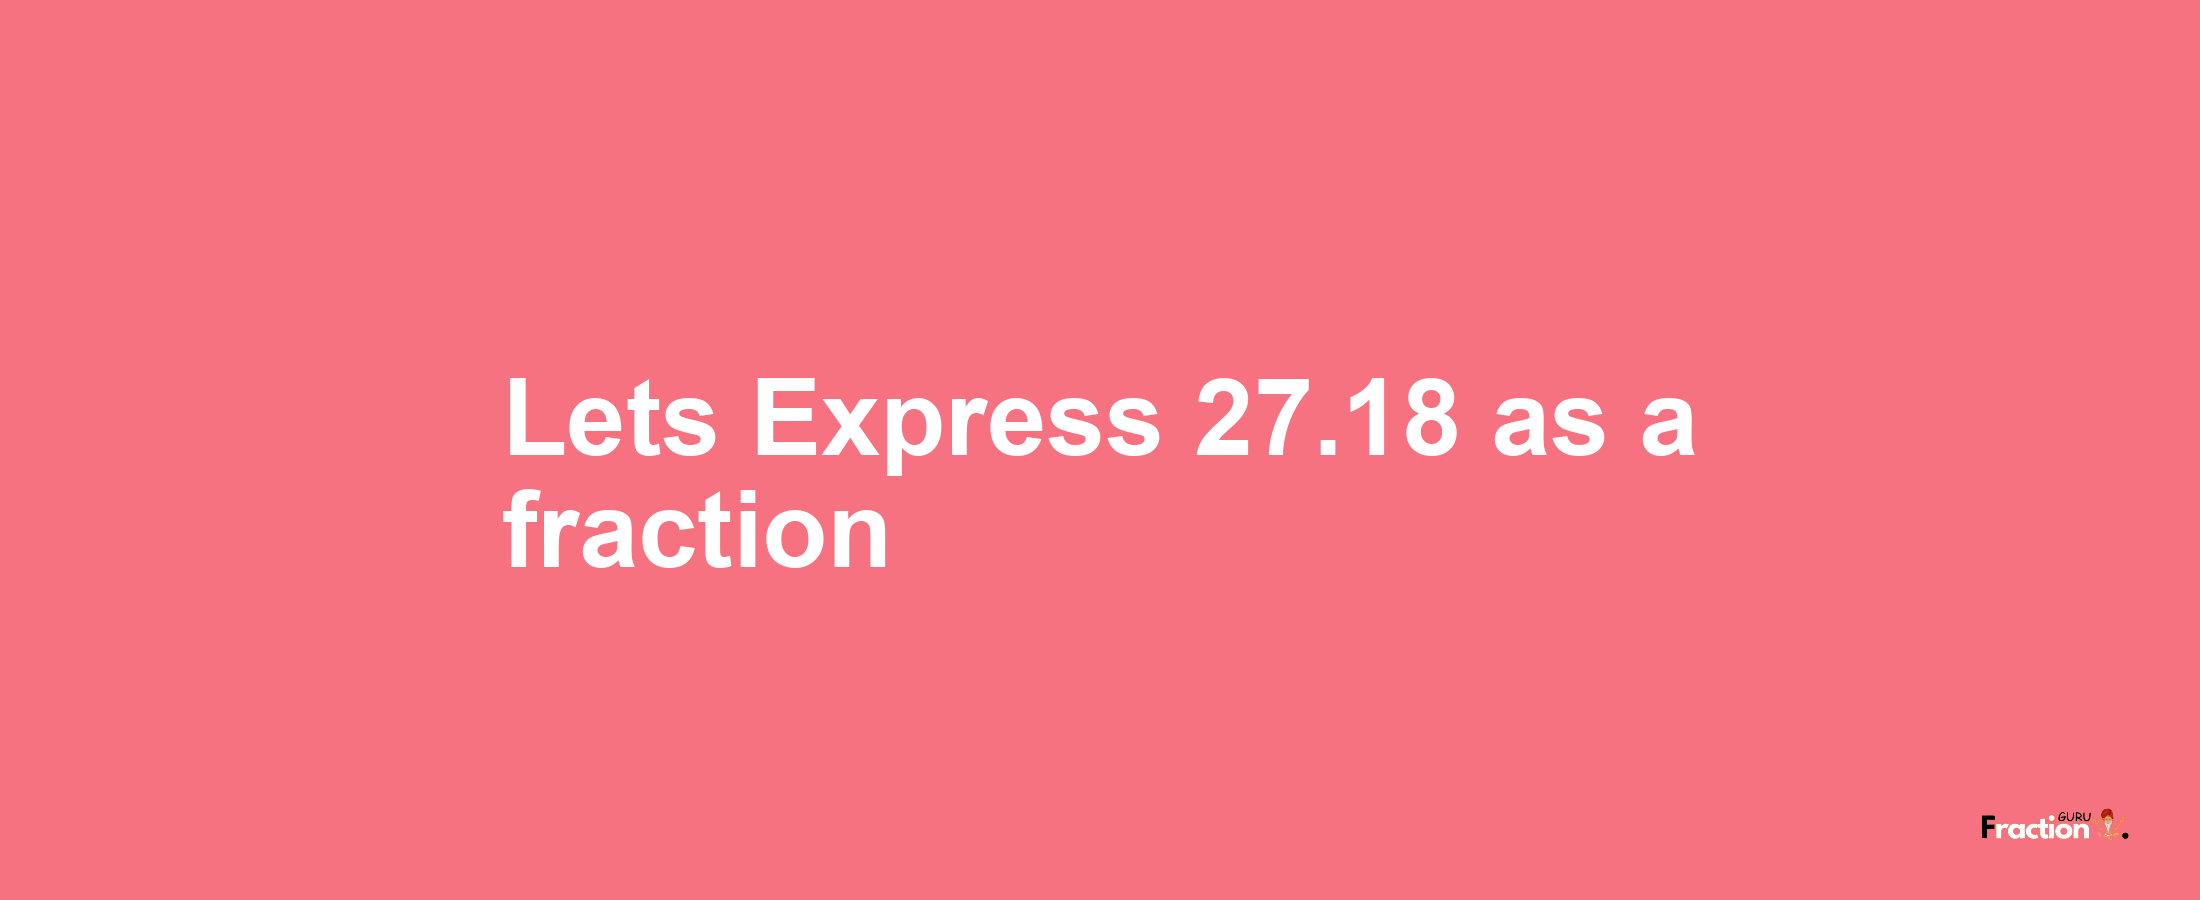 Lets Express 27.18 as afraction